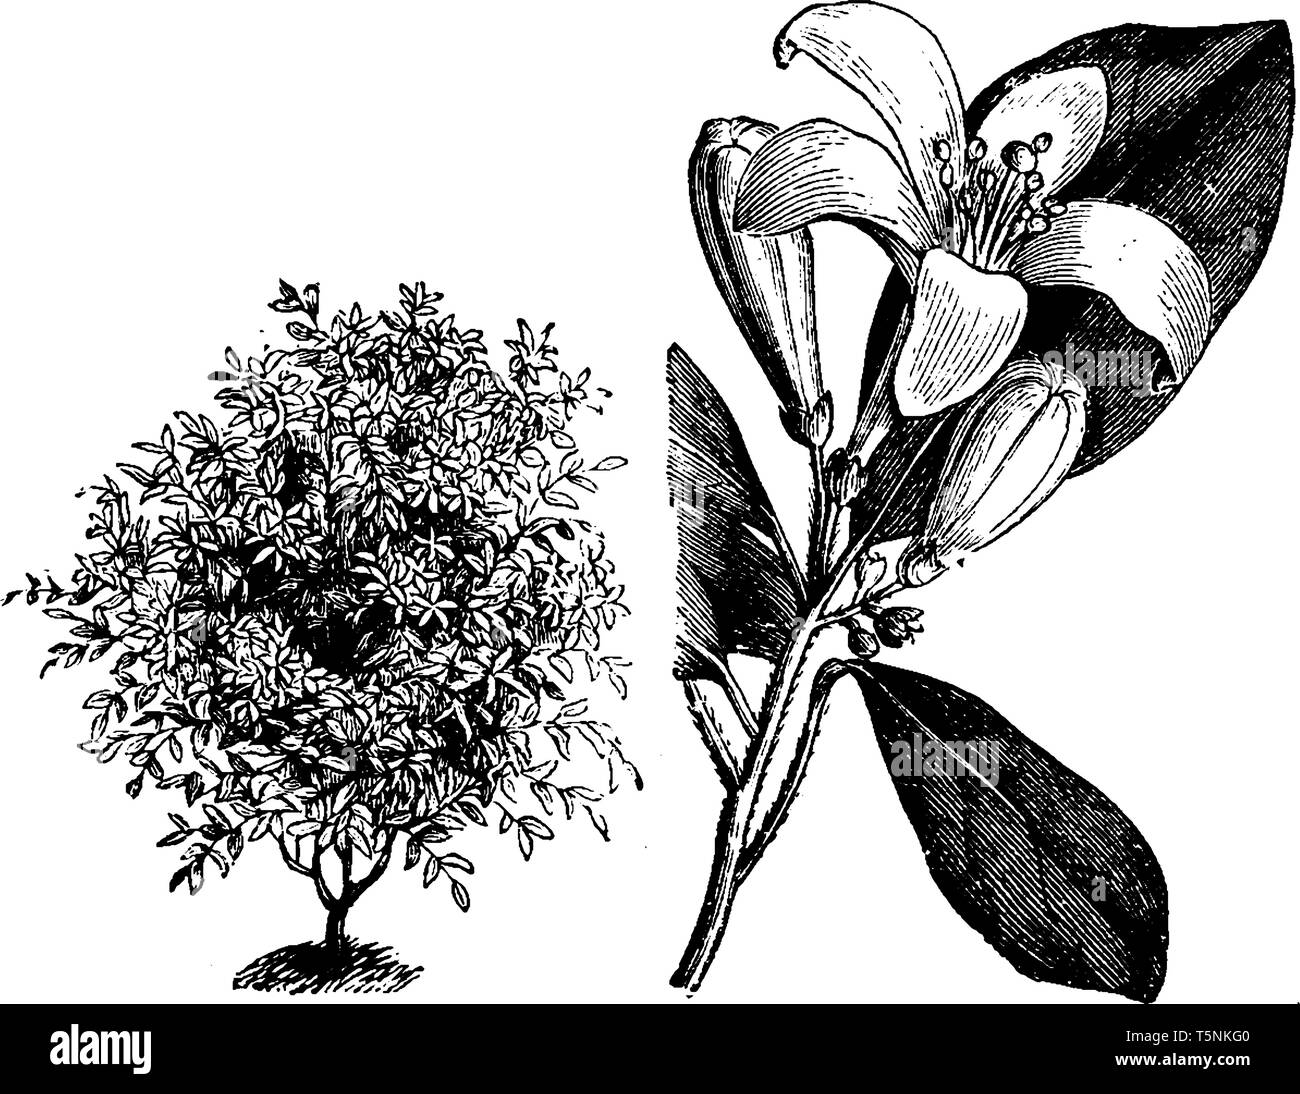 Murraya Exotica is an evergreen shrub. It contains bell-shaped while flowers. This plant is native to Indomalaya and northern Australia, vintage line  Stock Vector